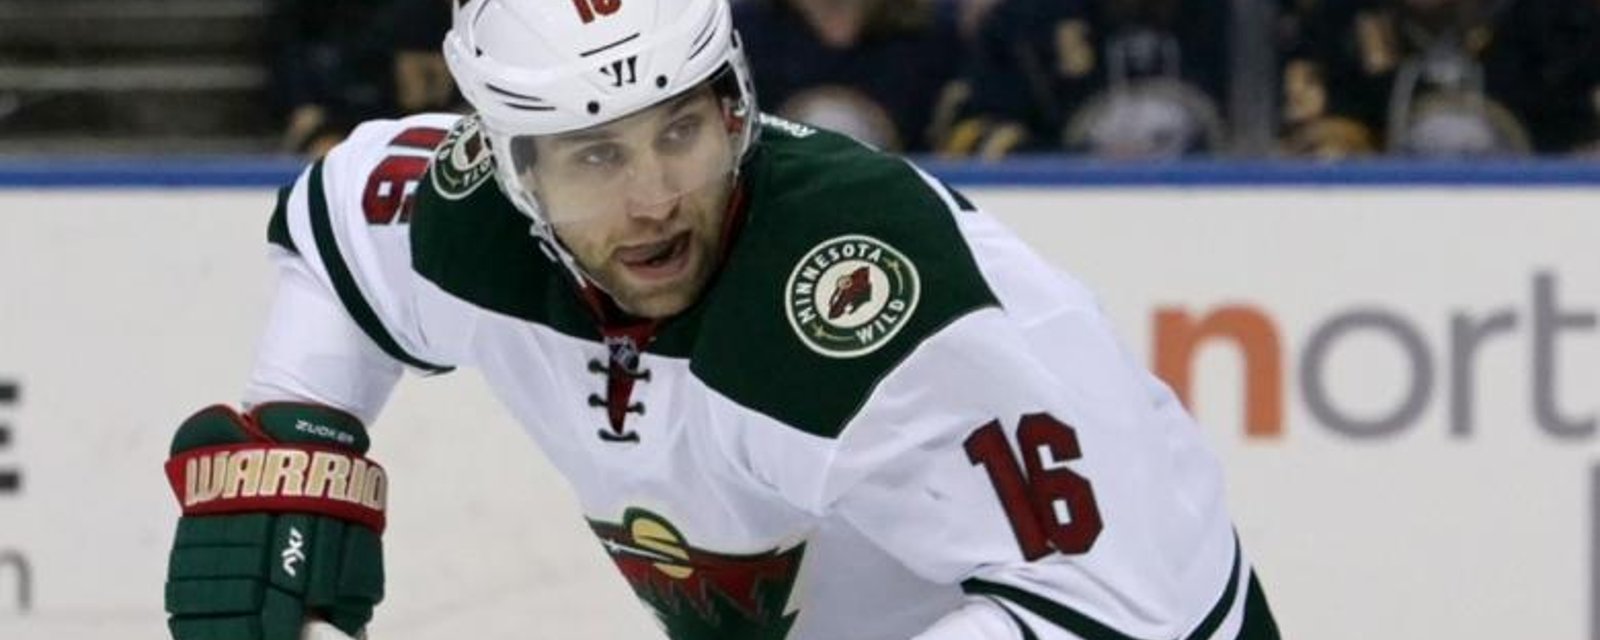 Wild announce a key signing amid today's turmoil in the NHL.